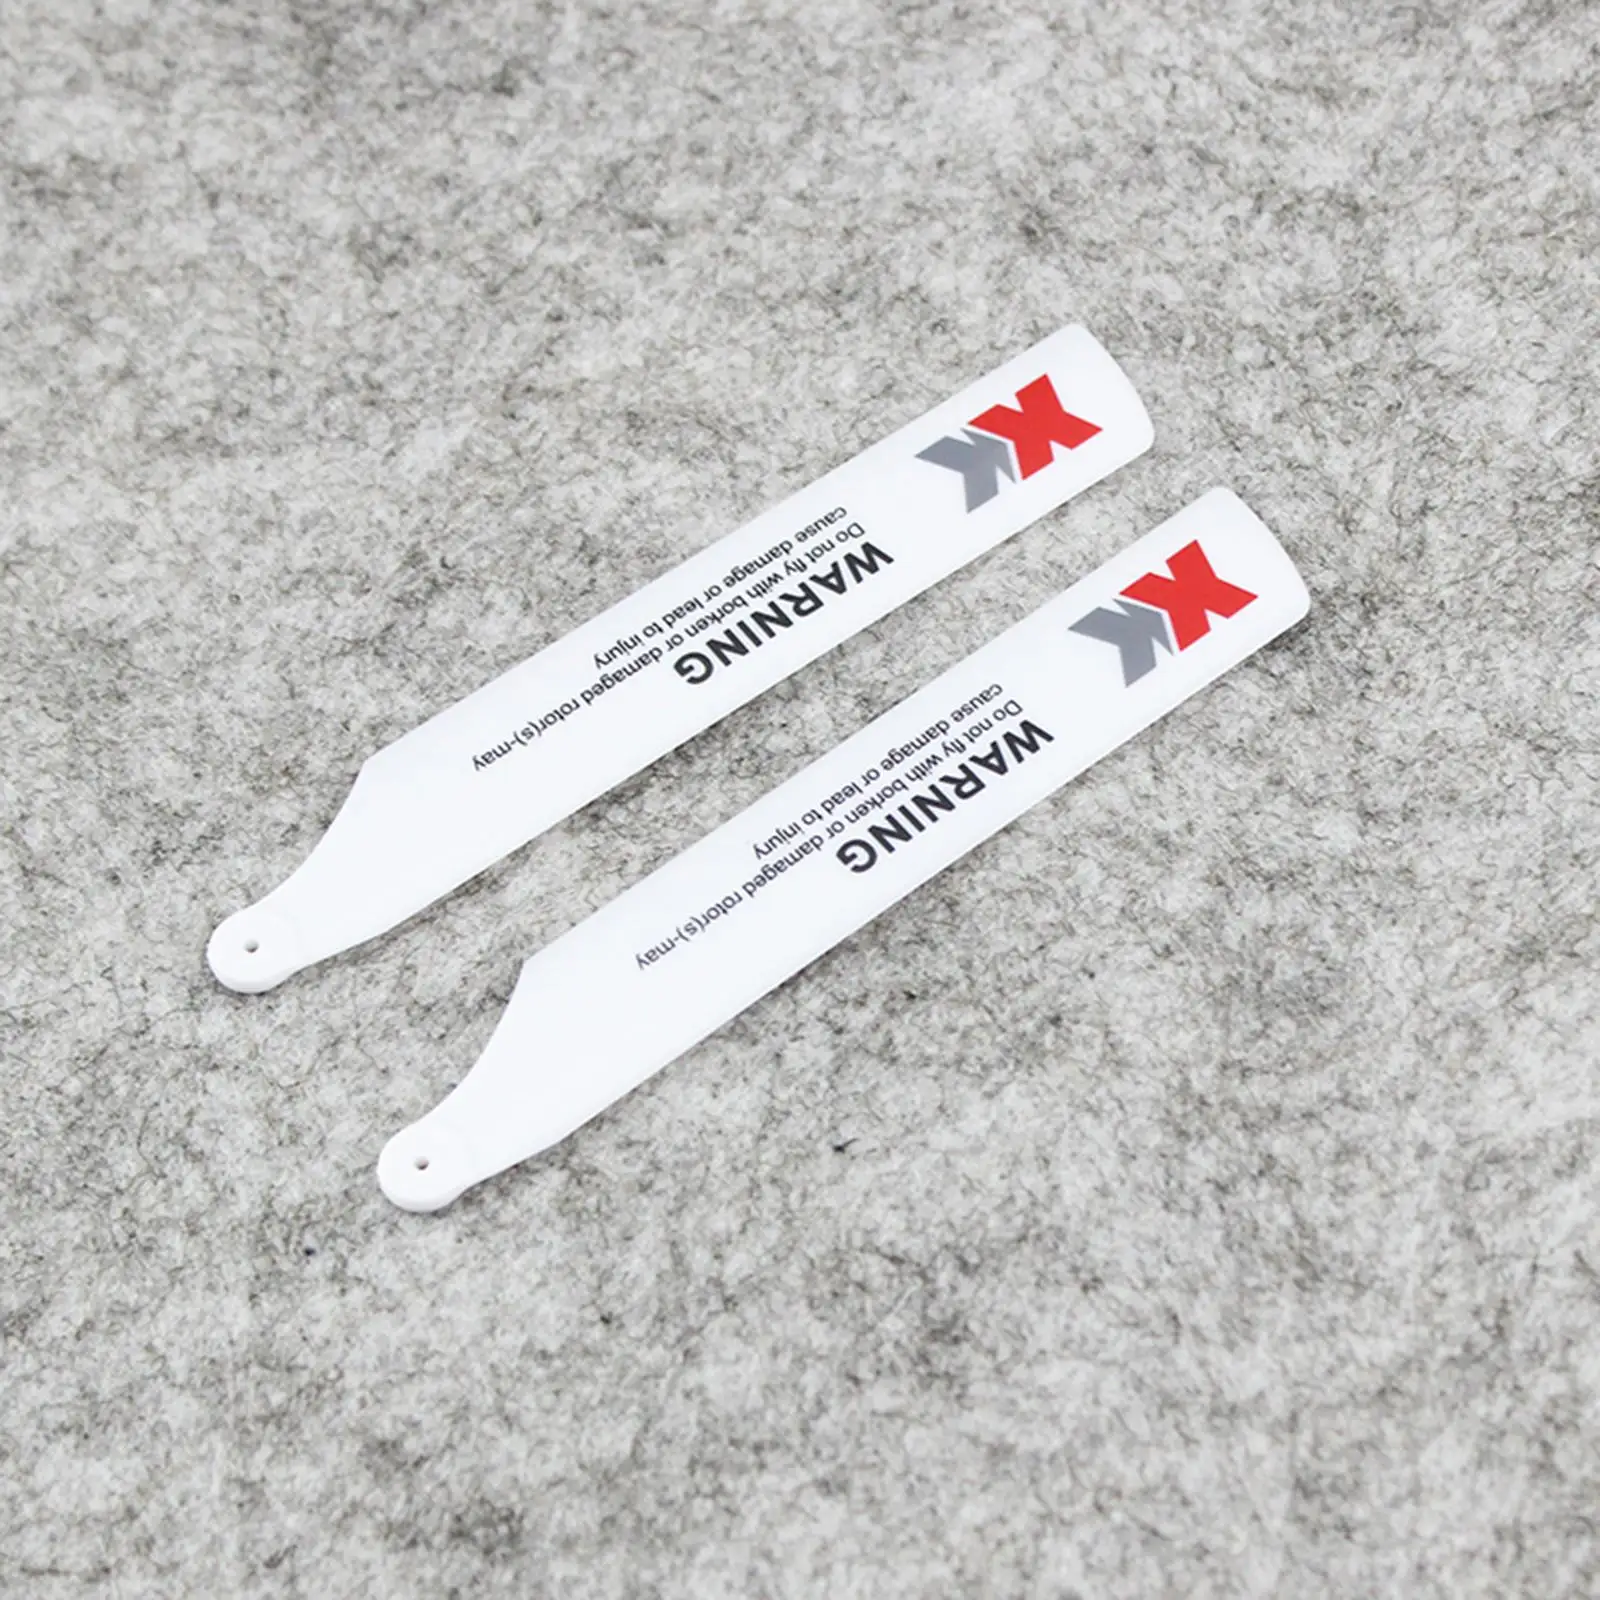 2 Pieces Propeller Blade K100.005 Accessories Durable Lightweight for Wltoys XK K100 K110 RC Airplane Aircraft